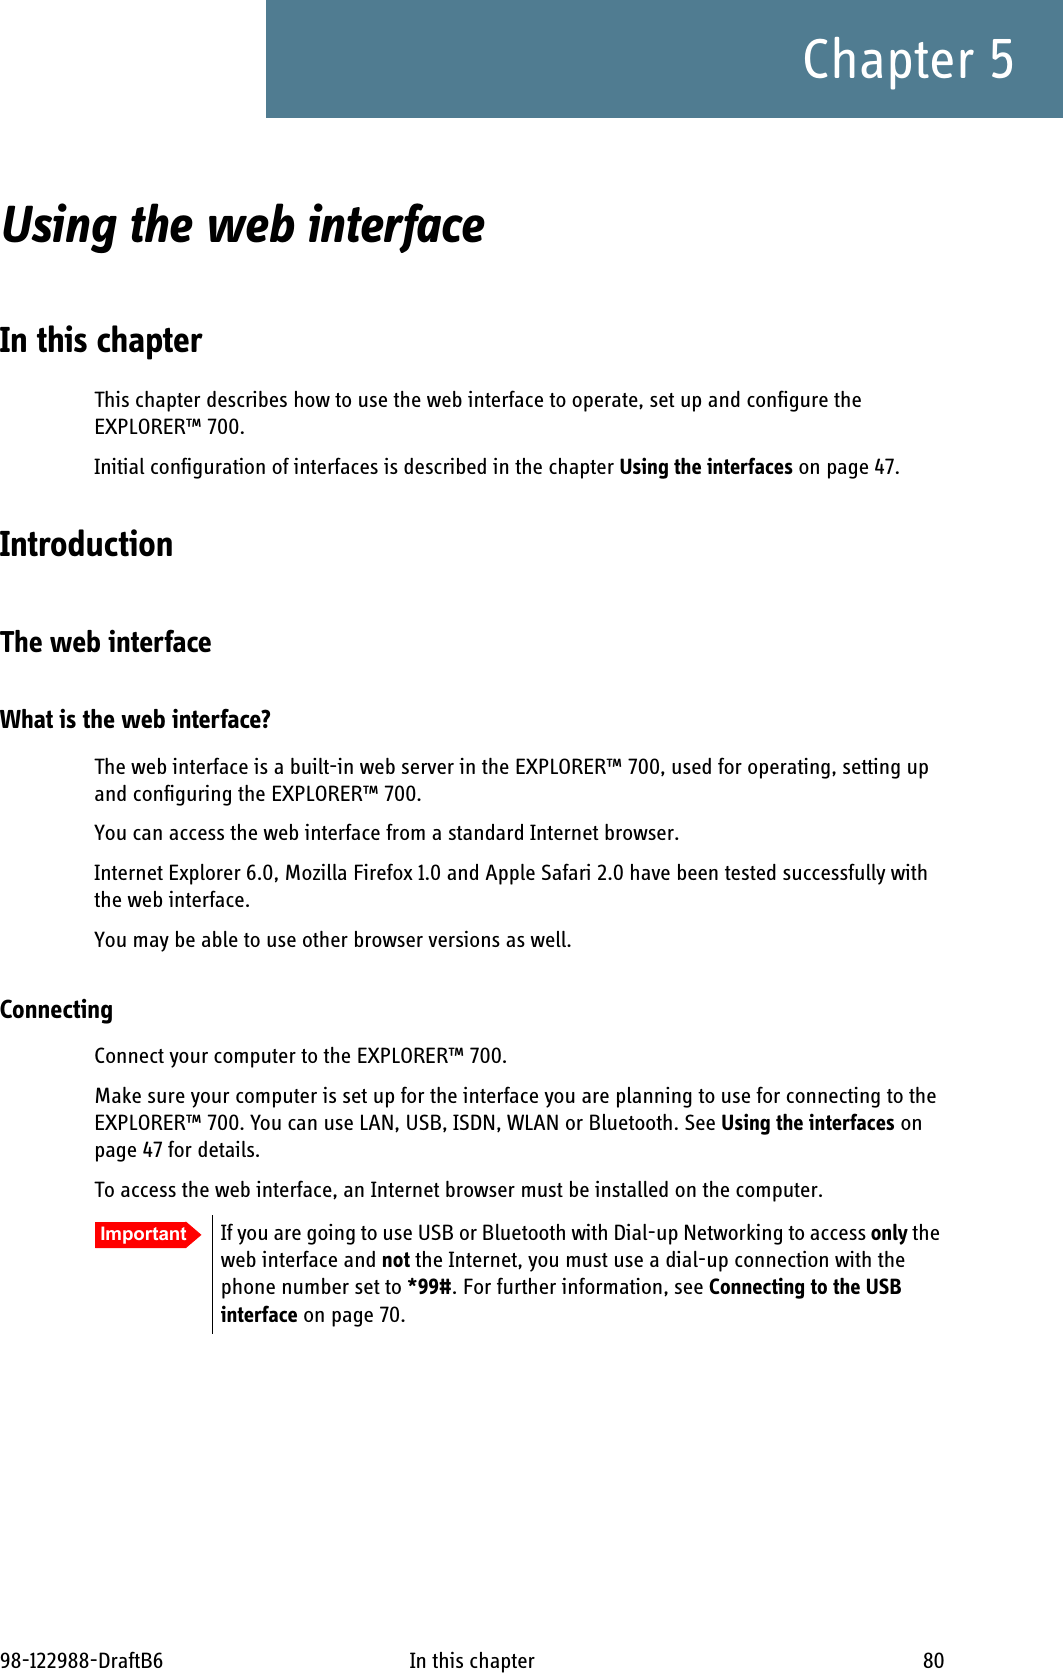 98-122988-DraftB6 In this chapter 80Chapter 5Using the web interface 5In this chapterThis chapter describes how to use the web interface to operate, set up and configure the EXPLORER™ 700. Initial configuration of interfaces is described in the chapter Using the interfaces on page 47.IntroductionThe web interfaceWhat is the web interface?The web interface is a built-in web server in the EXPLORER™ 700, used for operating, setting up and configuring the EXPLORER™ 700. You can access the web interface from a standard Internet browser. Internet Explorer 6.0, Mozilla Firefox 1.0 and Apple Safari 2.0 have been tested successfully with the web interface.You may be able to use other browser versions as well.ConnectingConnect your computer to the EXPLORER™ 700.Make sure your computer is set up for the interface you are planning to use for connecting to the EXPLORER™ 700. You can use LAN, USB, ISDN, WLAN or Bluetooth. See Using the interfaces on page 47 for details.To access the web interface, an Internet browser must be installed on the computer. Important If you are going to use USB or Bluetooth with Dial-up Networking to access only the web interface and not the Internet, you must use a dial-up connection with the phone number set to *99#. For further information, see Connecting to the USB interface on page 70.